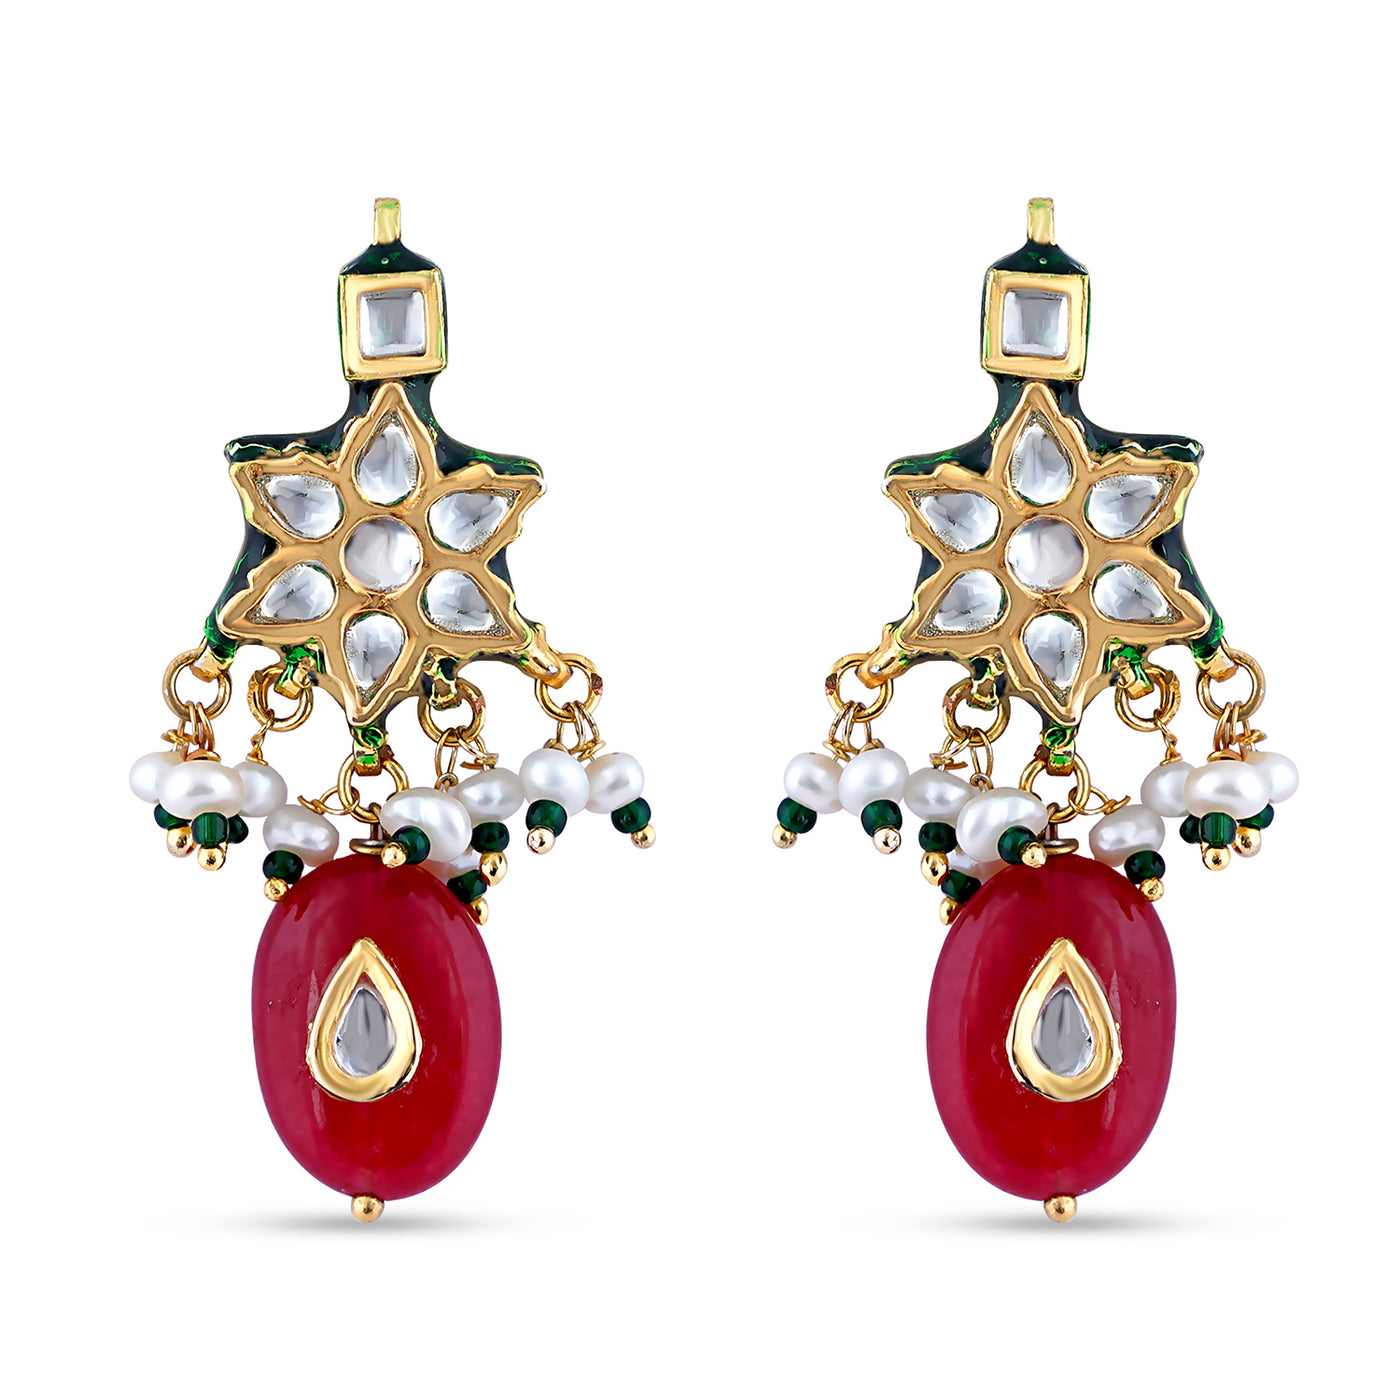 Star Shaped Red Drop Kundan Earrings. Front View showing off meenakari work and white pearls.